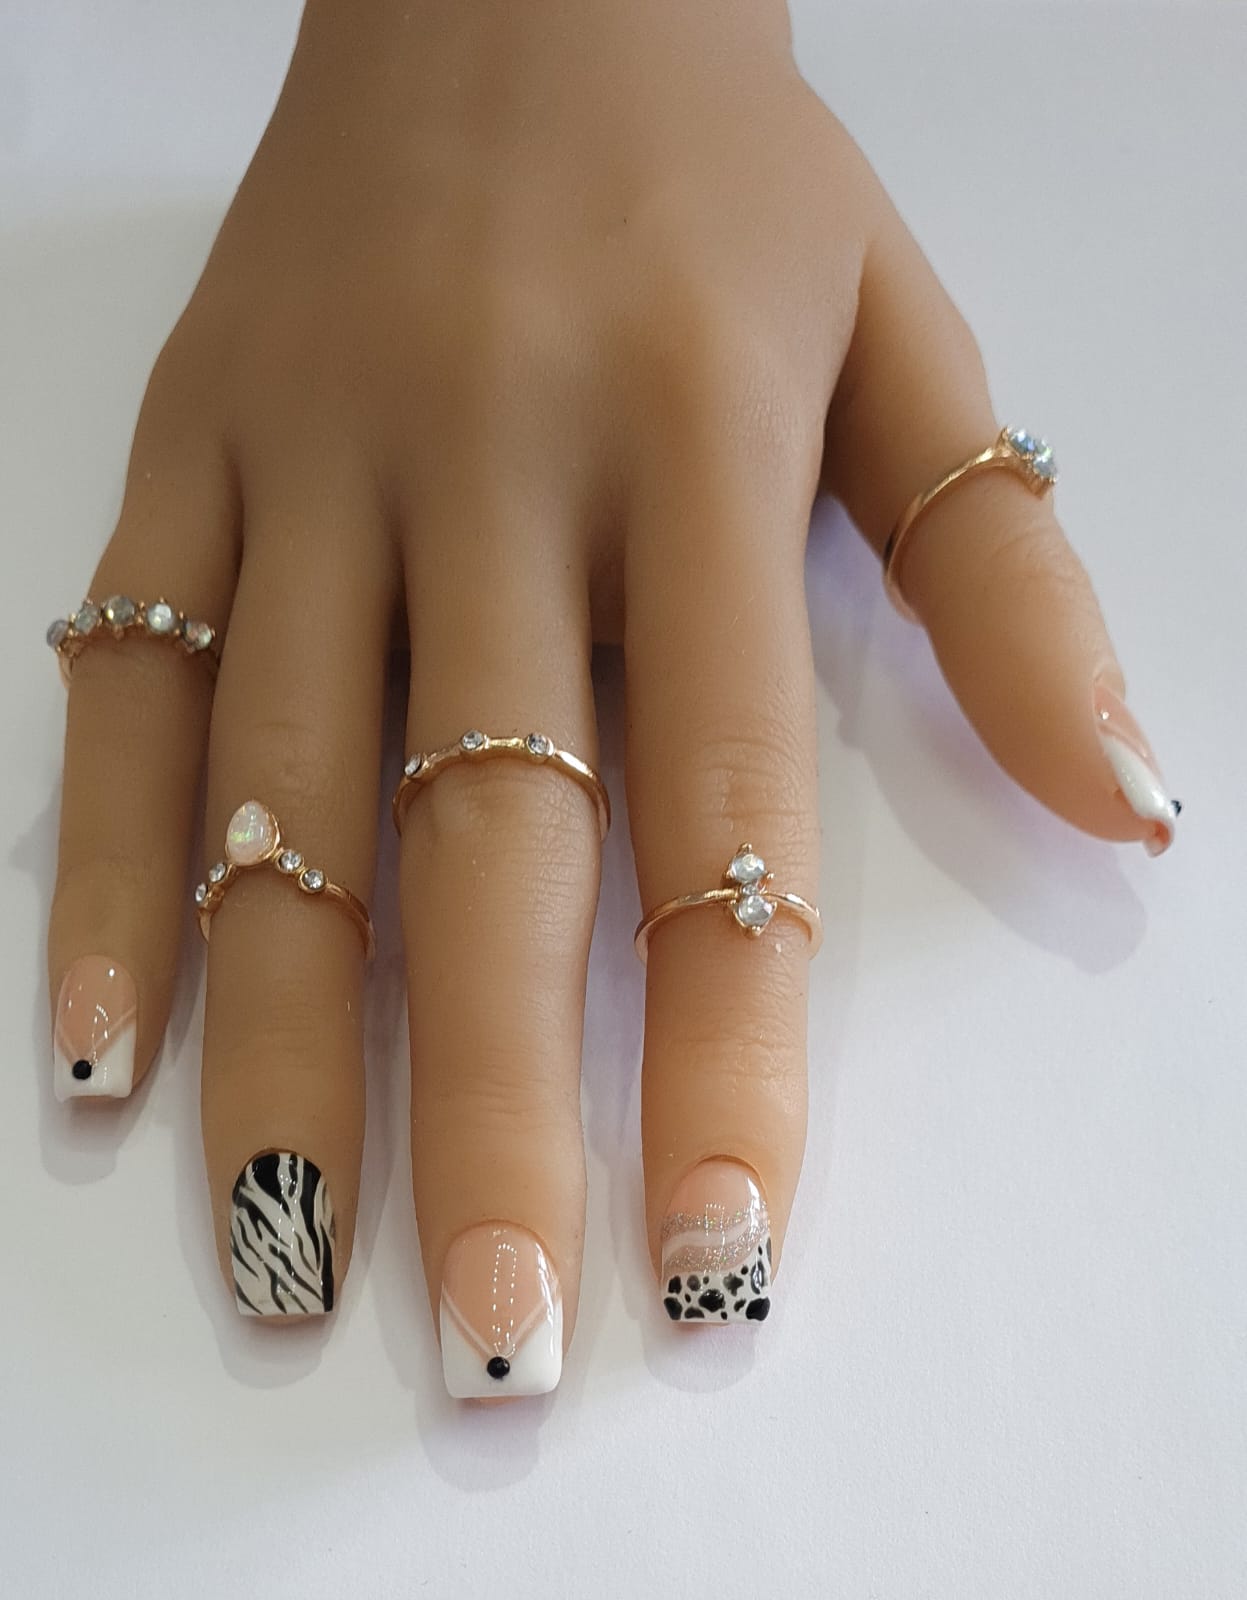 Press On Nails- Extra Short Square Shaped Black/white French Tip zebra and spots Spring/Summer2023 collection full cover gel tip luxury false nails salon quality hand painted custom made uk